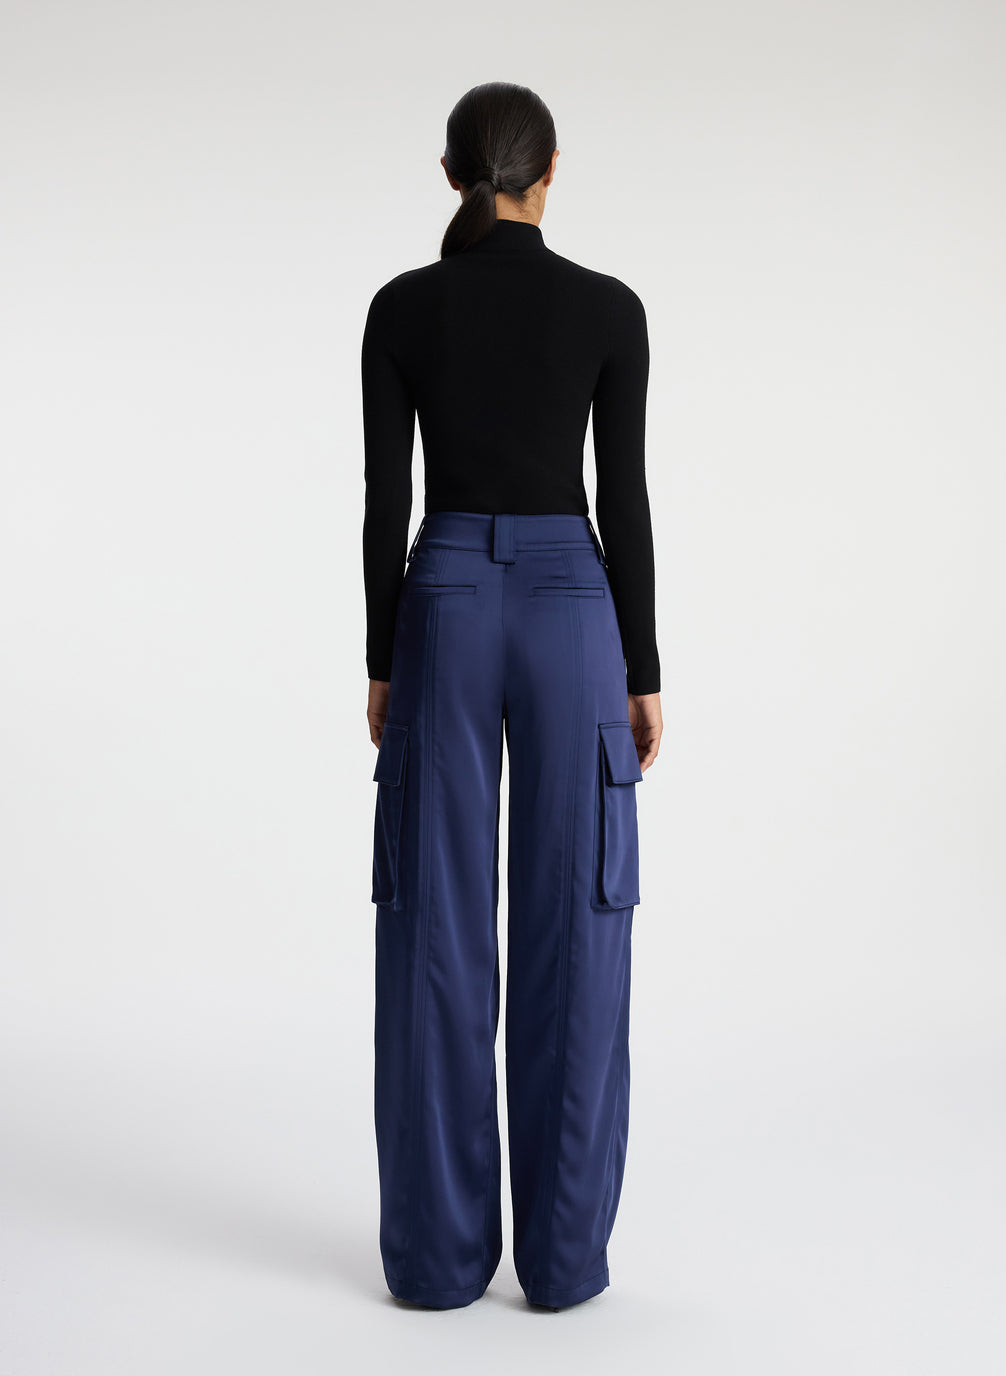 back view of woman wearing black knit long sleeve top and blue satin cargo pants